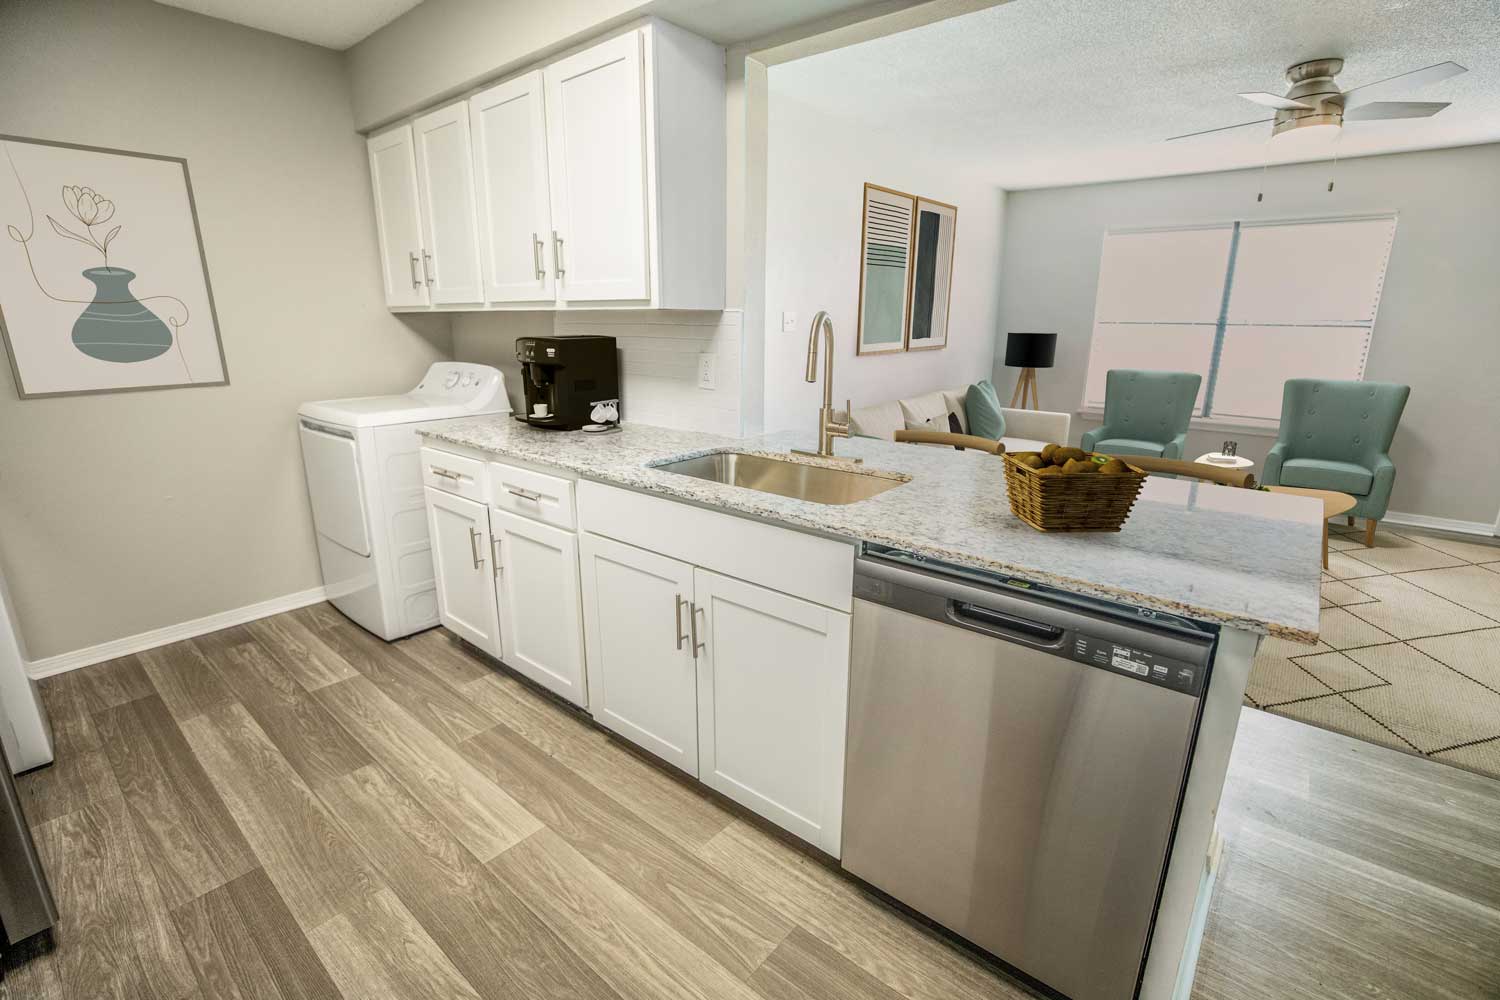 Our Newly Renovated Kitchens with all New Stainless Steel Appliances!